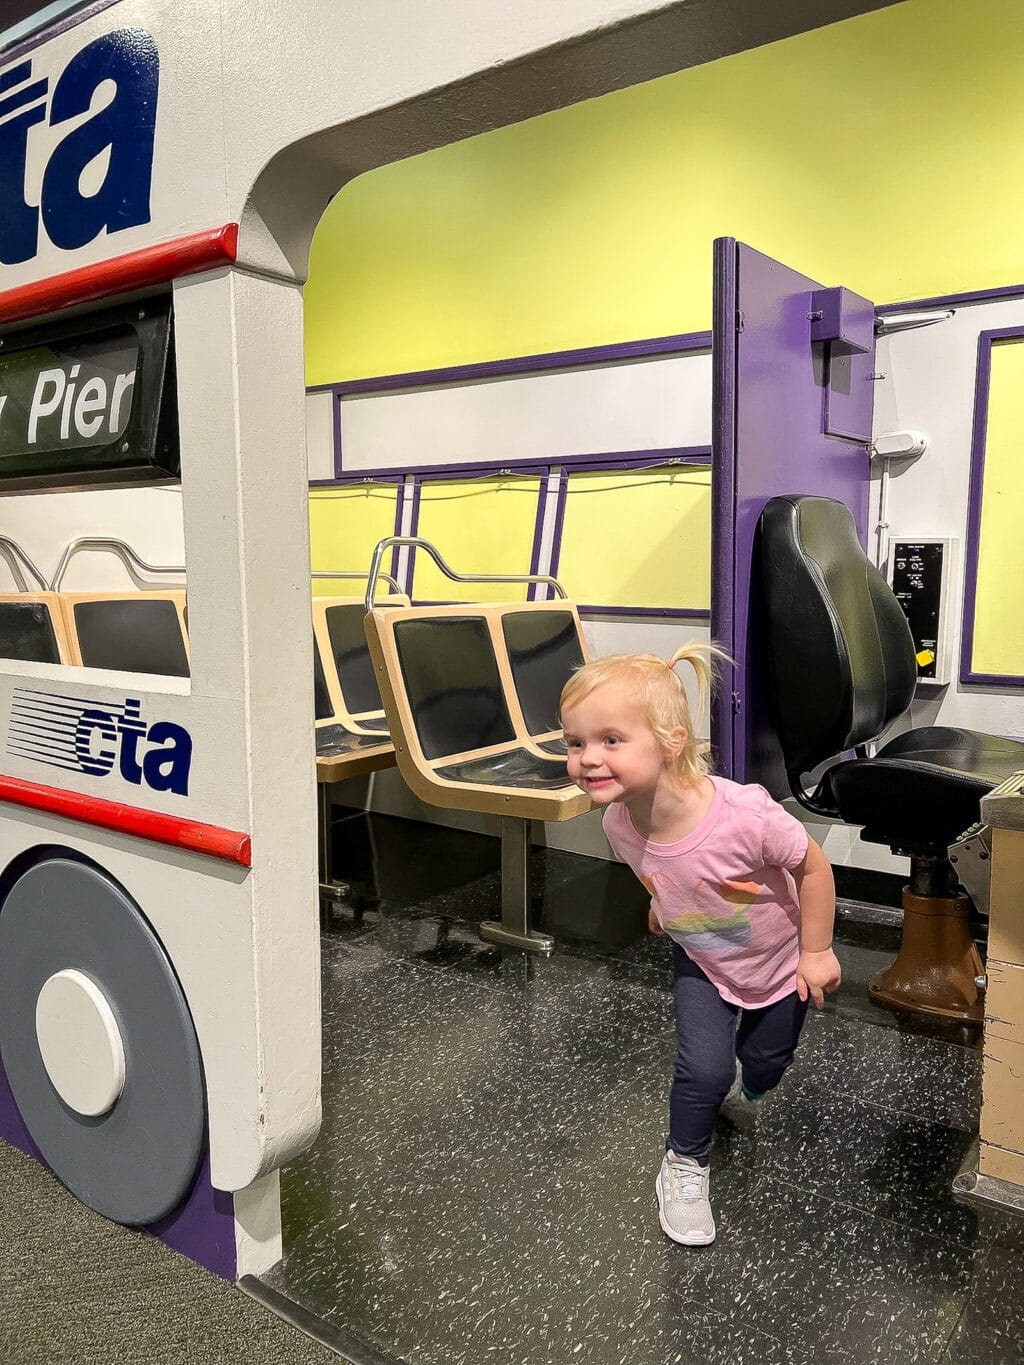 The children's museum is a great idea for activities to do with your grandchildren